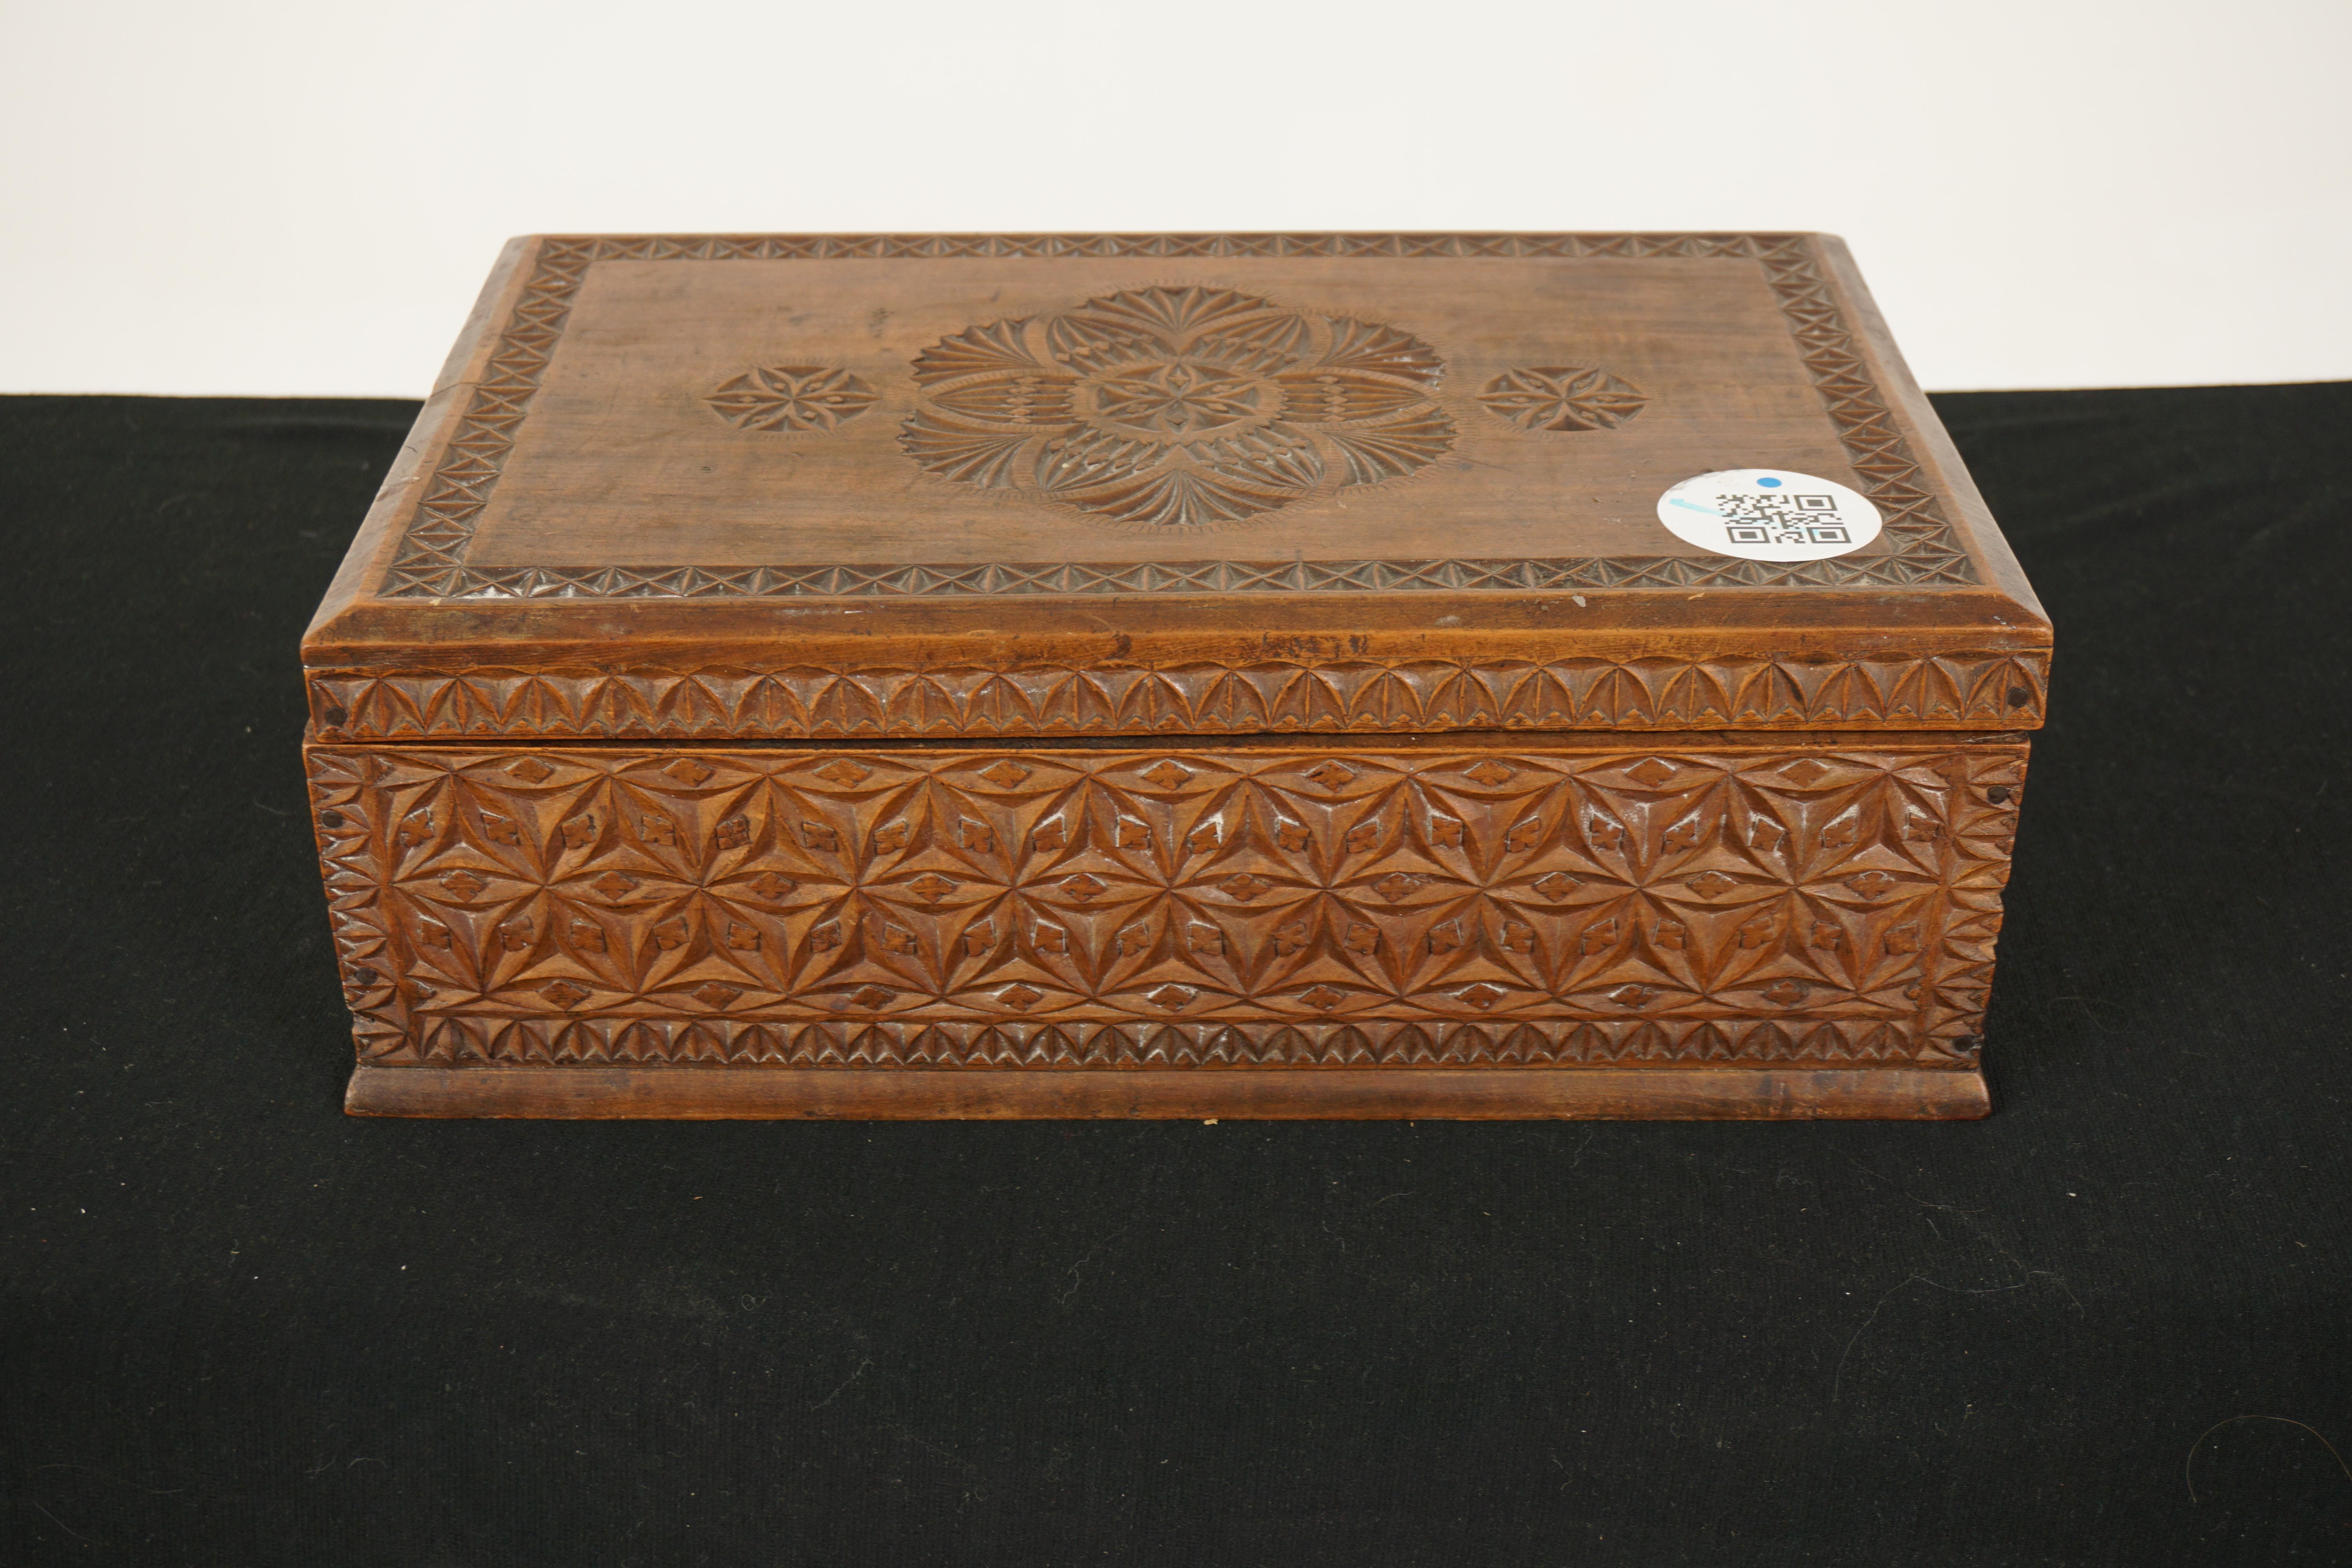 Antique Chipped Carved camphor wood box, Scotland 1880, H617

Scotland 1880
Solid Camphor wood
Original Finish
Rectangular Carved top
Carved front and sides
Opens to reveal three interior sections
Very fine carving
Some wear and scuffs